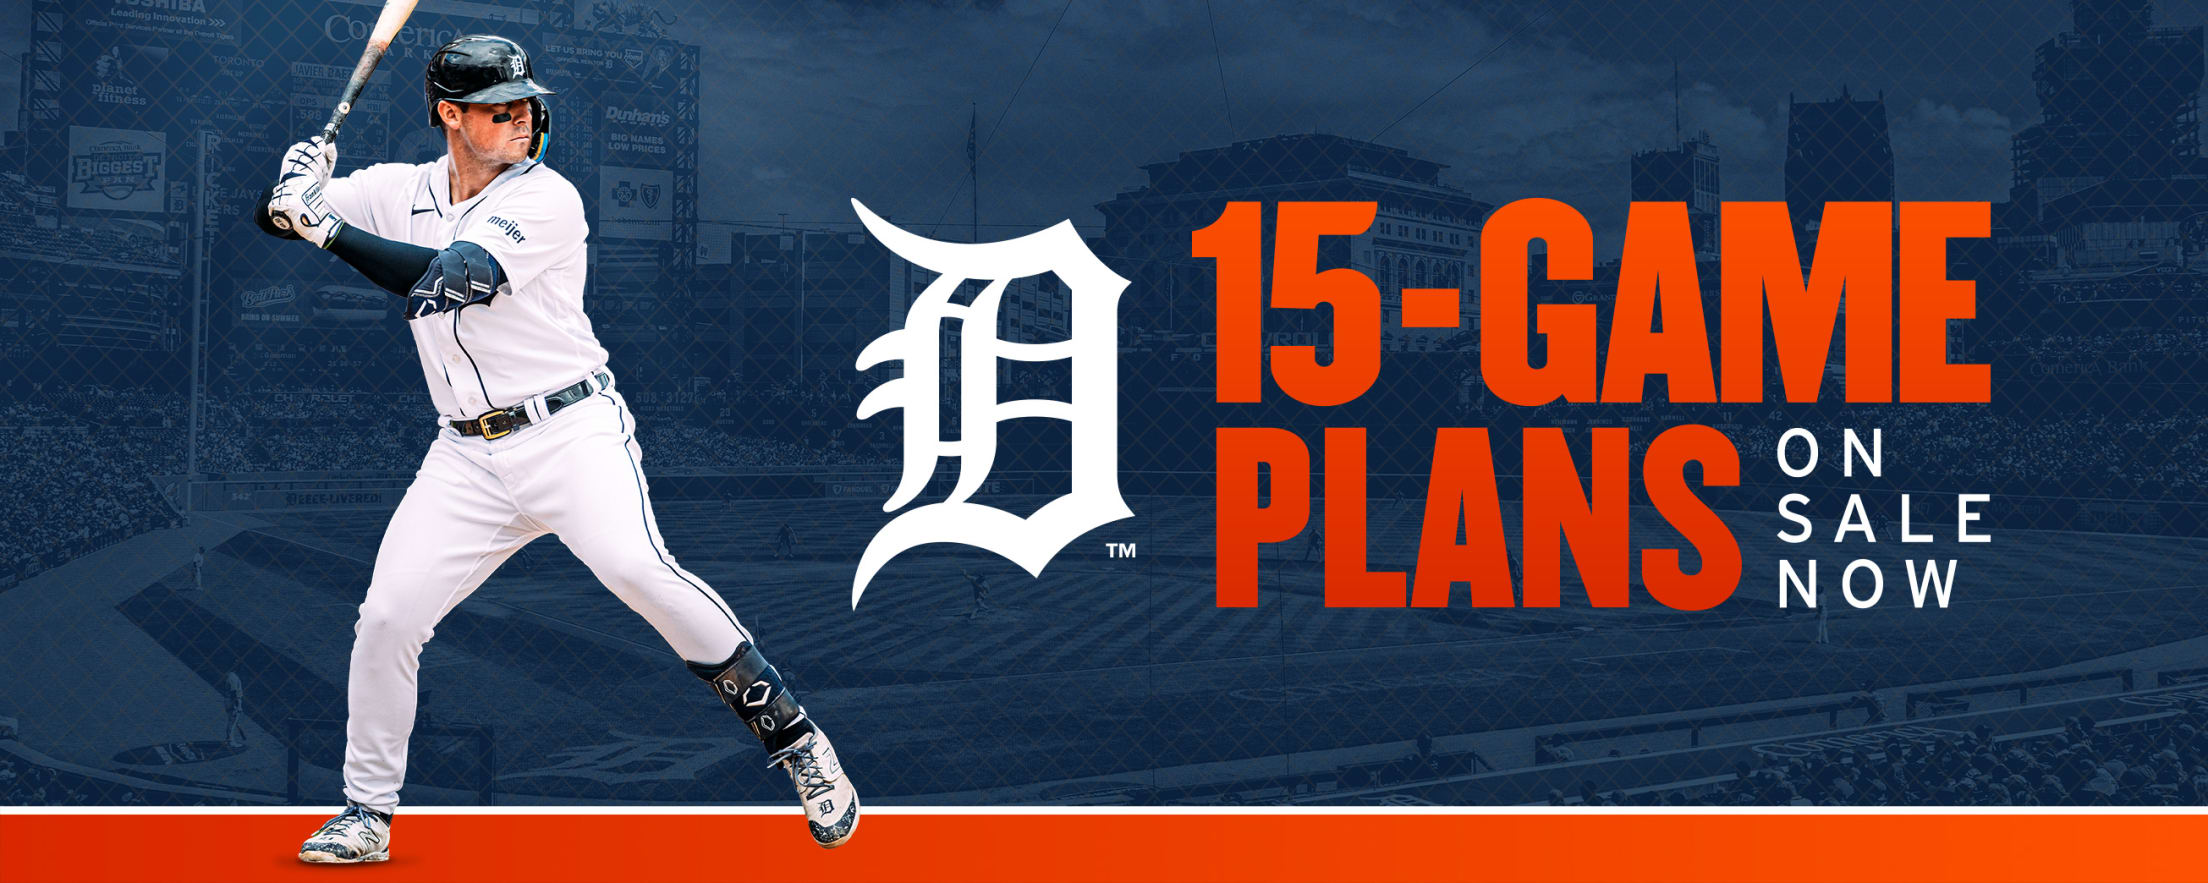 Tigers top Guardians in Miguel Cabrera's final game - Field Level Media -  Professional sports content solutions